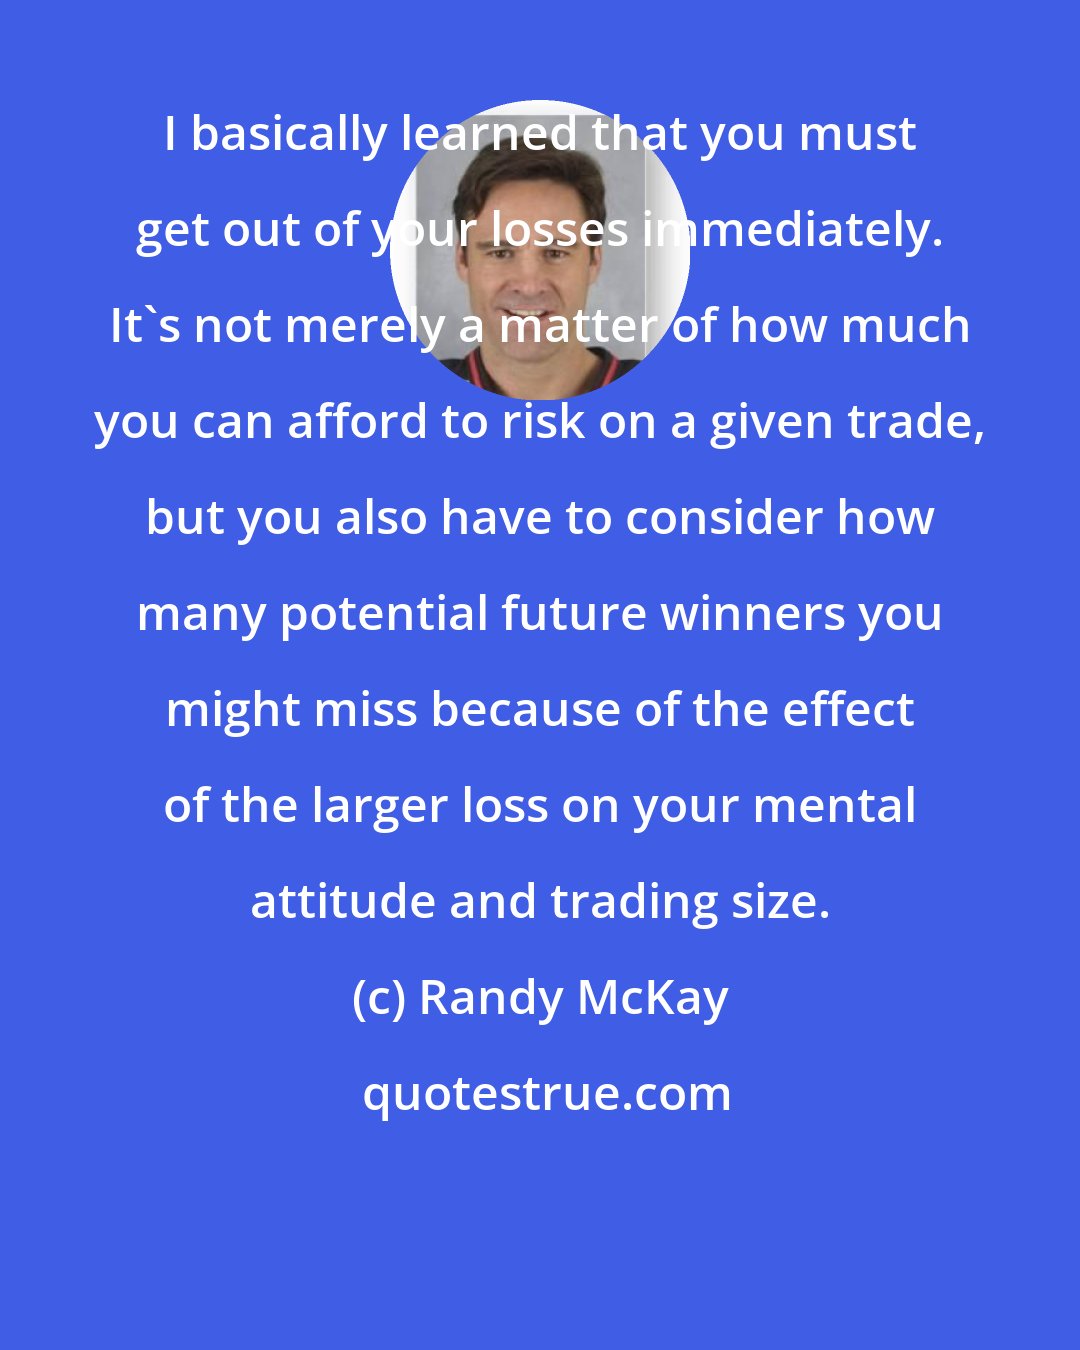 Randy McKay: I basically learned that you must get out of your losses immediately. It's not merely a matter of how much you can afford to risk on a given trade, but you also have to consider how many potential future winners you might miss because of the effect of the larger loss on your mental attitude and trading size.